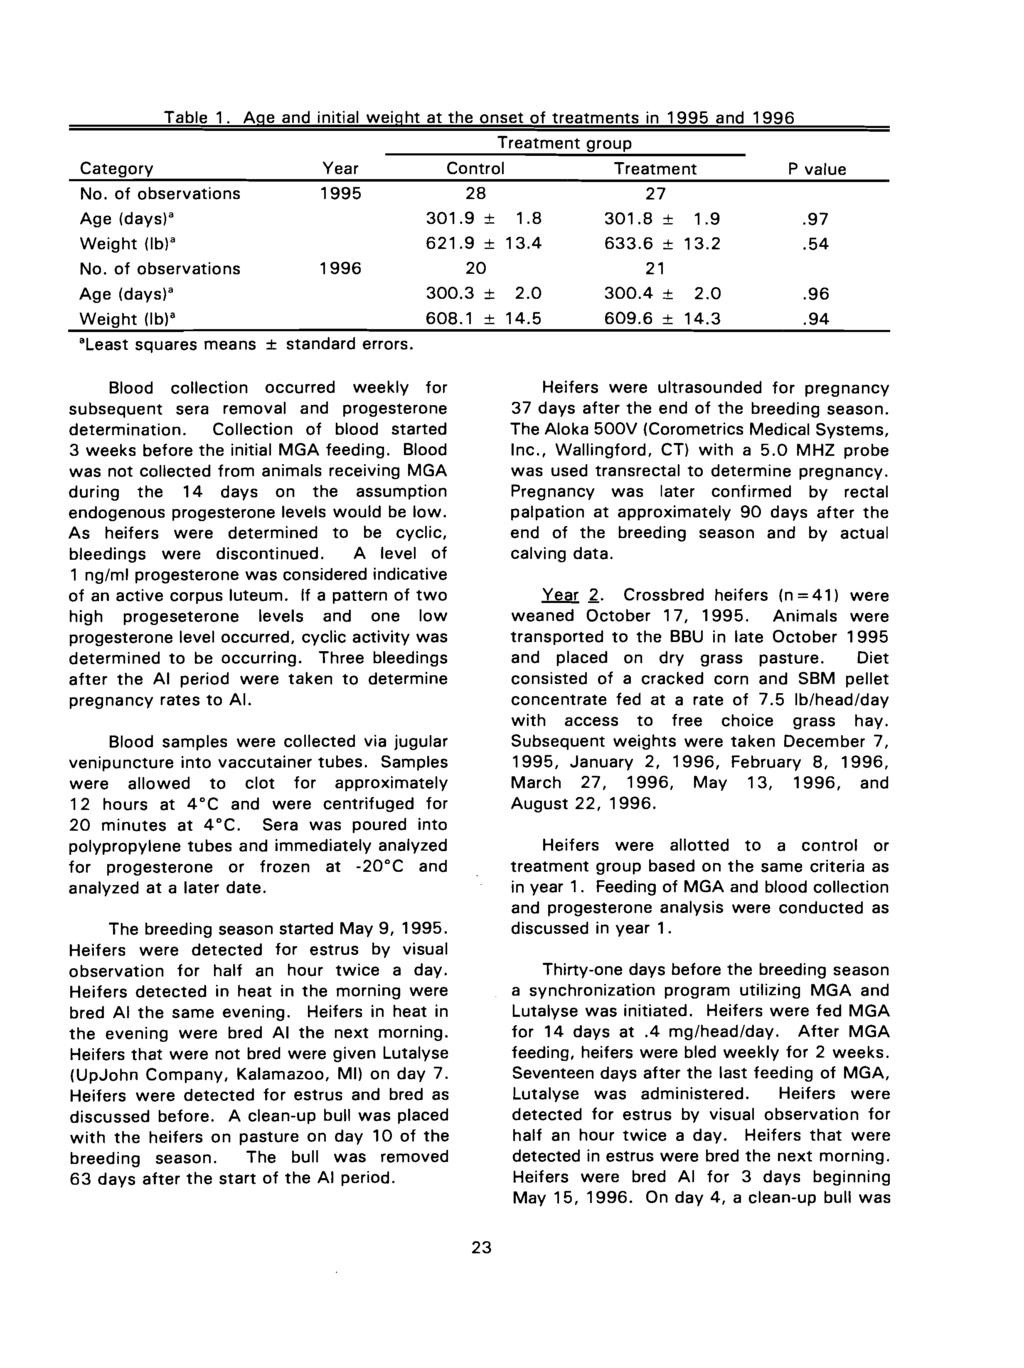 Table 1. Aqe and initial weiqht at the onset of treatments in 1995 and 1996 Treatment aroud No. of observations 1995 28 27 Age (days)" Weight (Ib)" No. of observations 1996 20 21 Age (days)" 300.